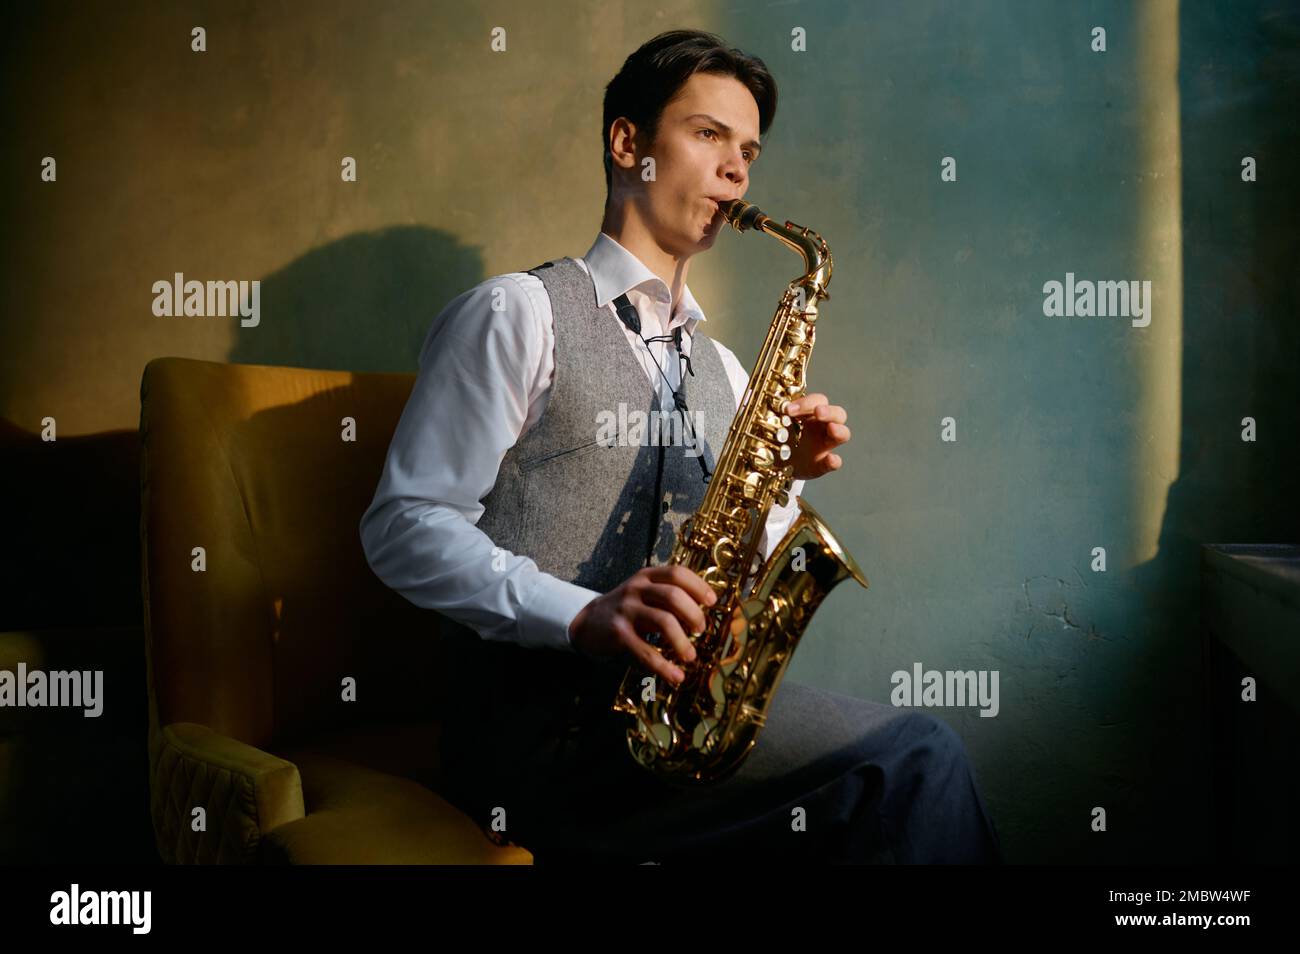 Jazz musician playing saxophone in front of window Stock Photo